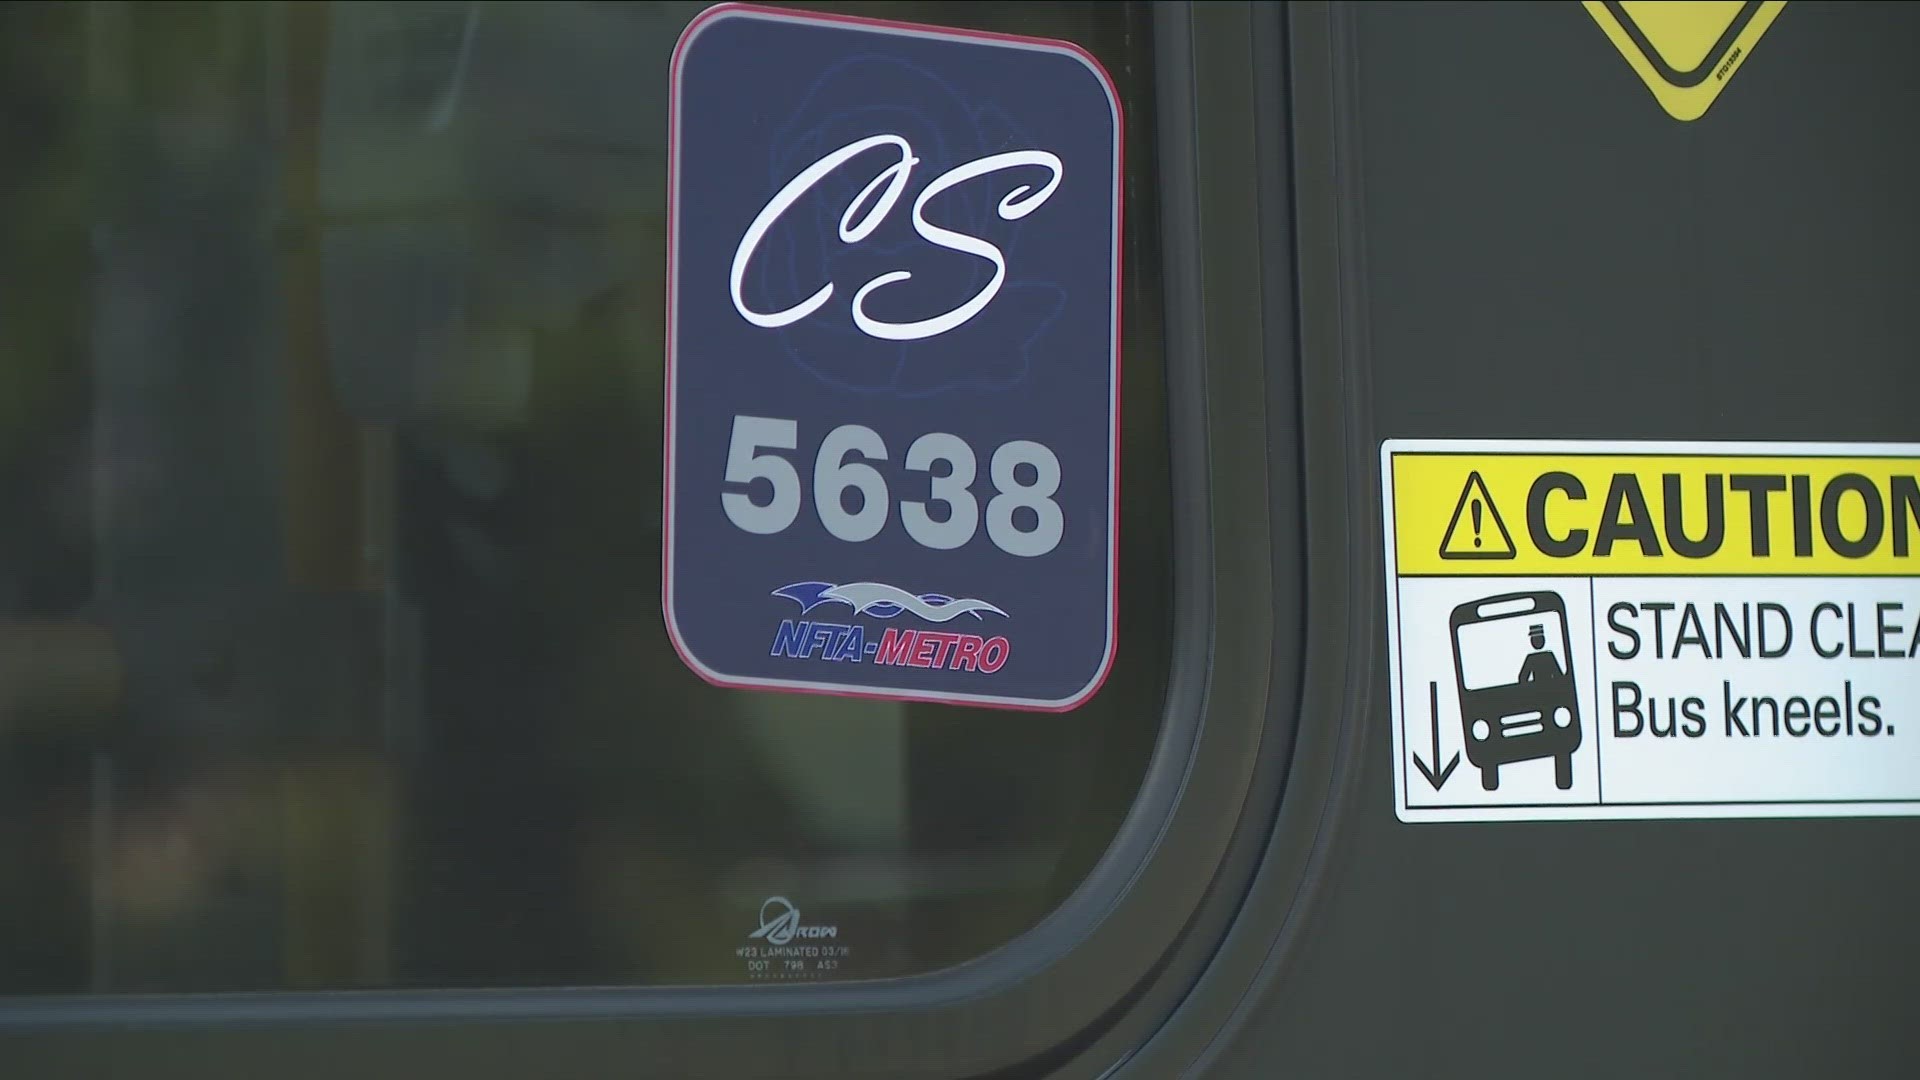 The NFTA is remembering her by putting her initials "C-S" and employee number on metro bus vehicles.